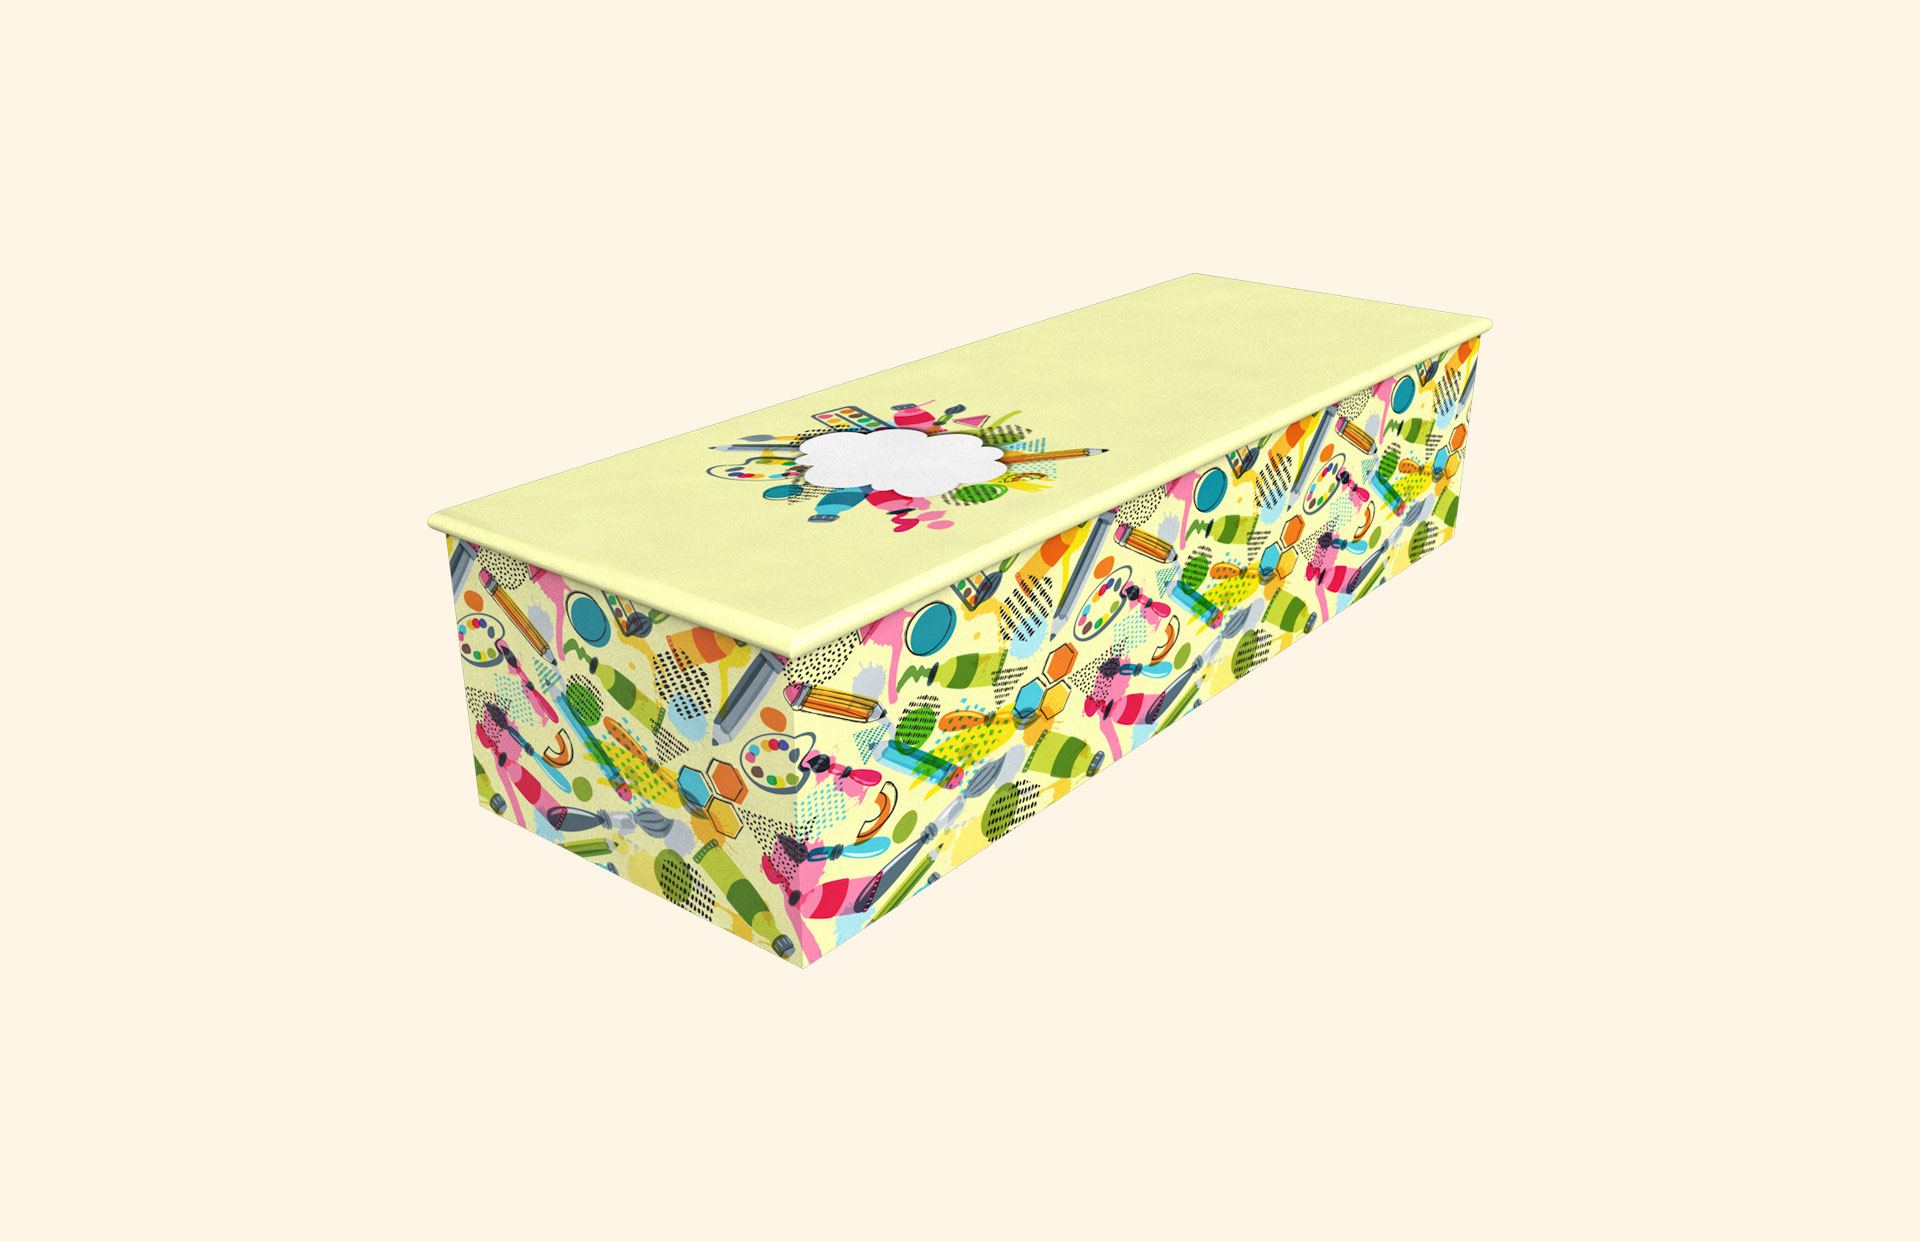 Painting design on a child wooden casket